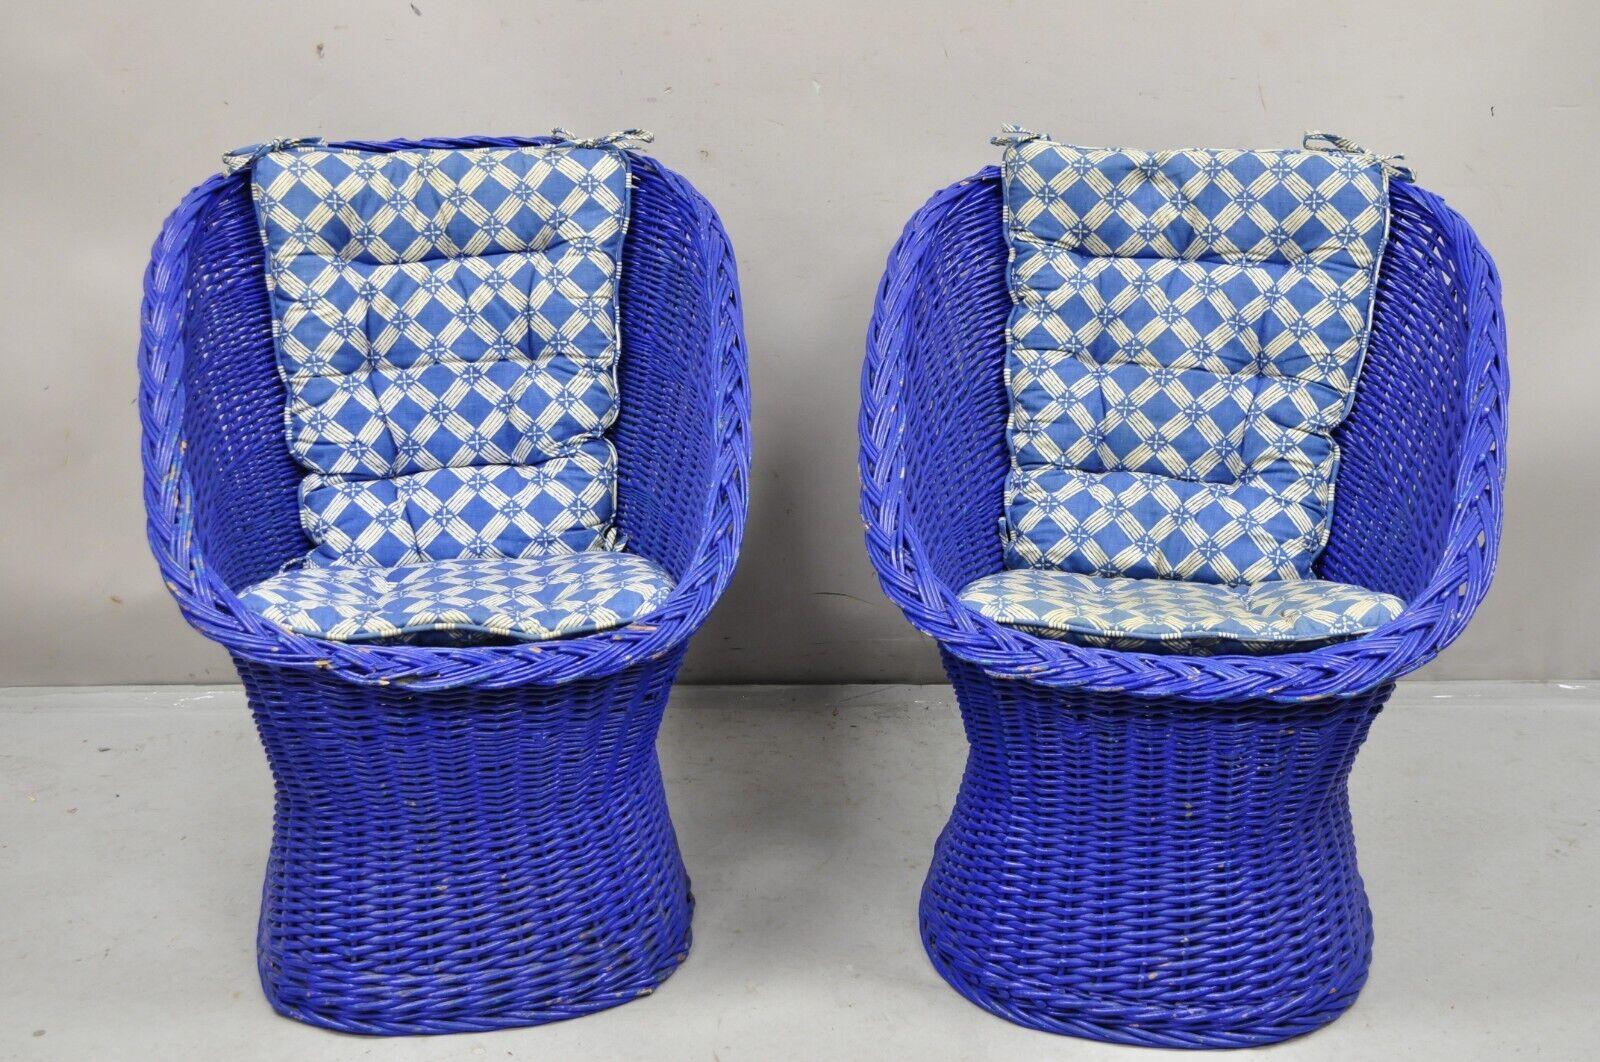 Vintage Mid Century Modern Blue Painted Wicker Rattan Pod Club Chairs - a Pair. Circa Mid 20th Century. Measurements: 31